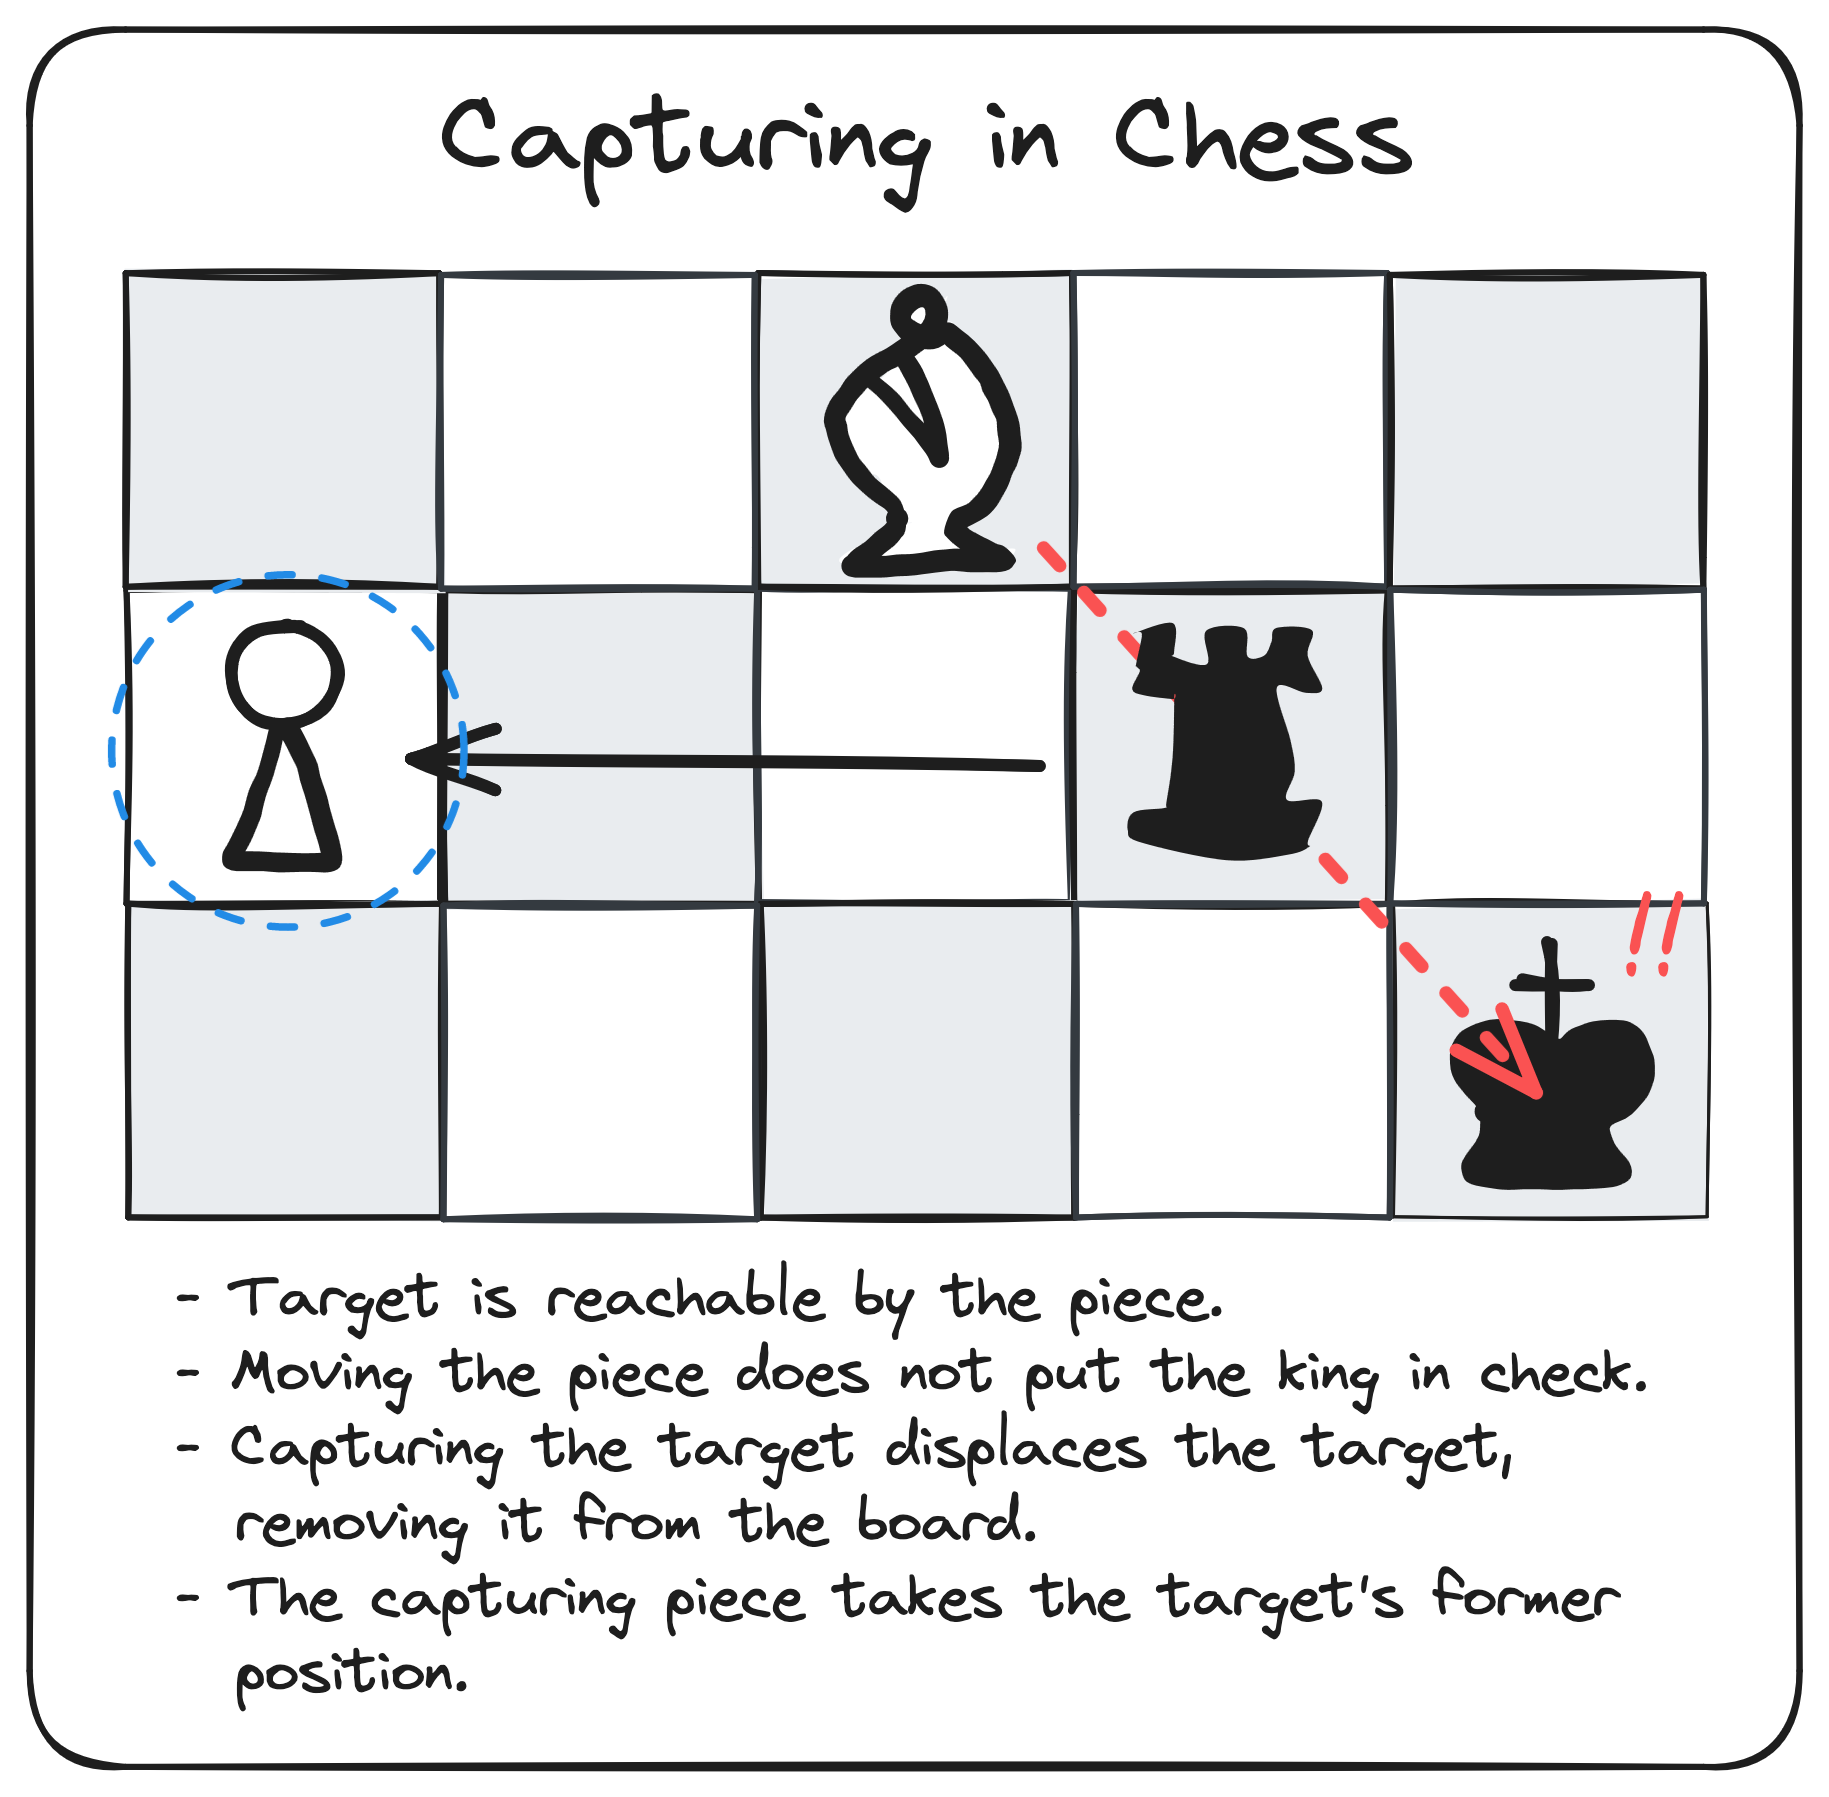 Capturing in Chess